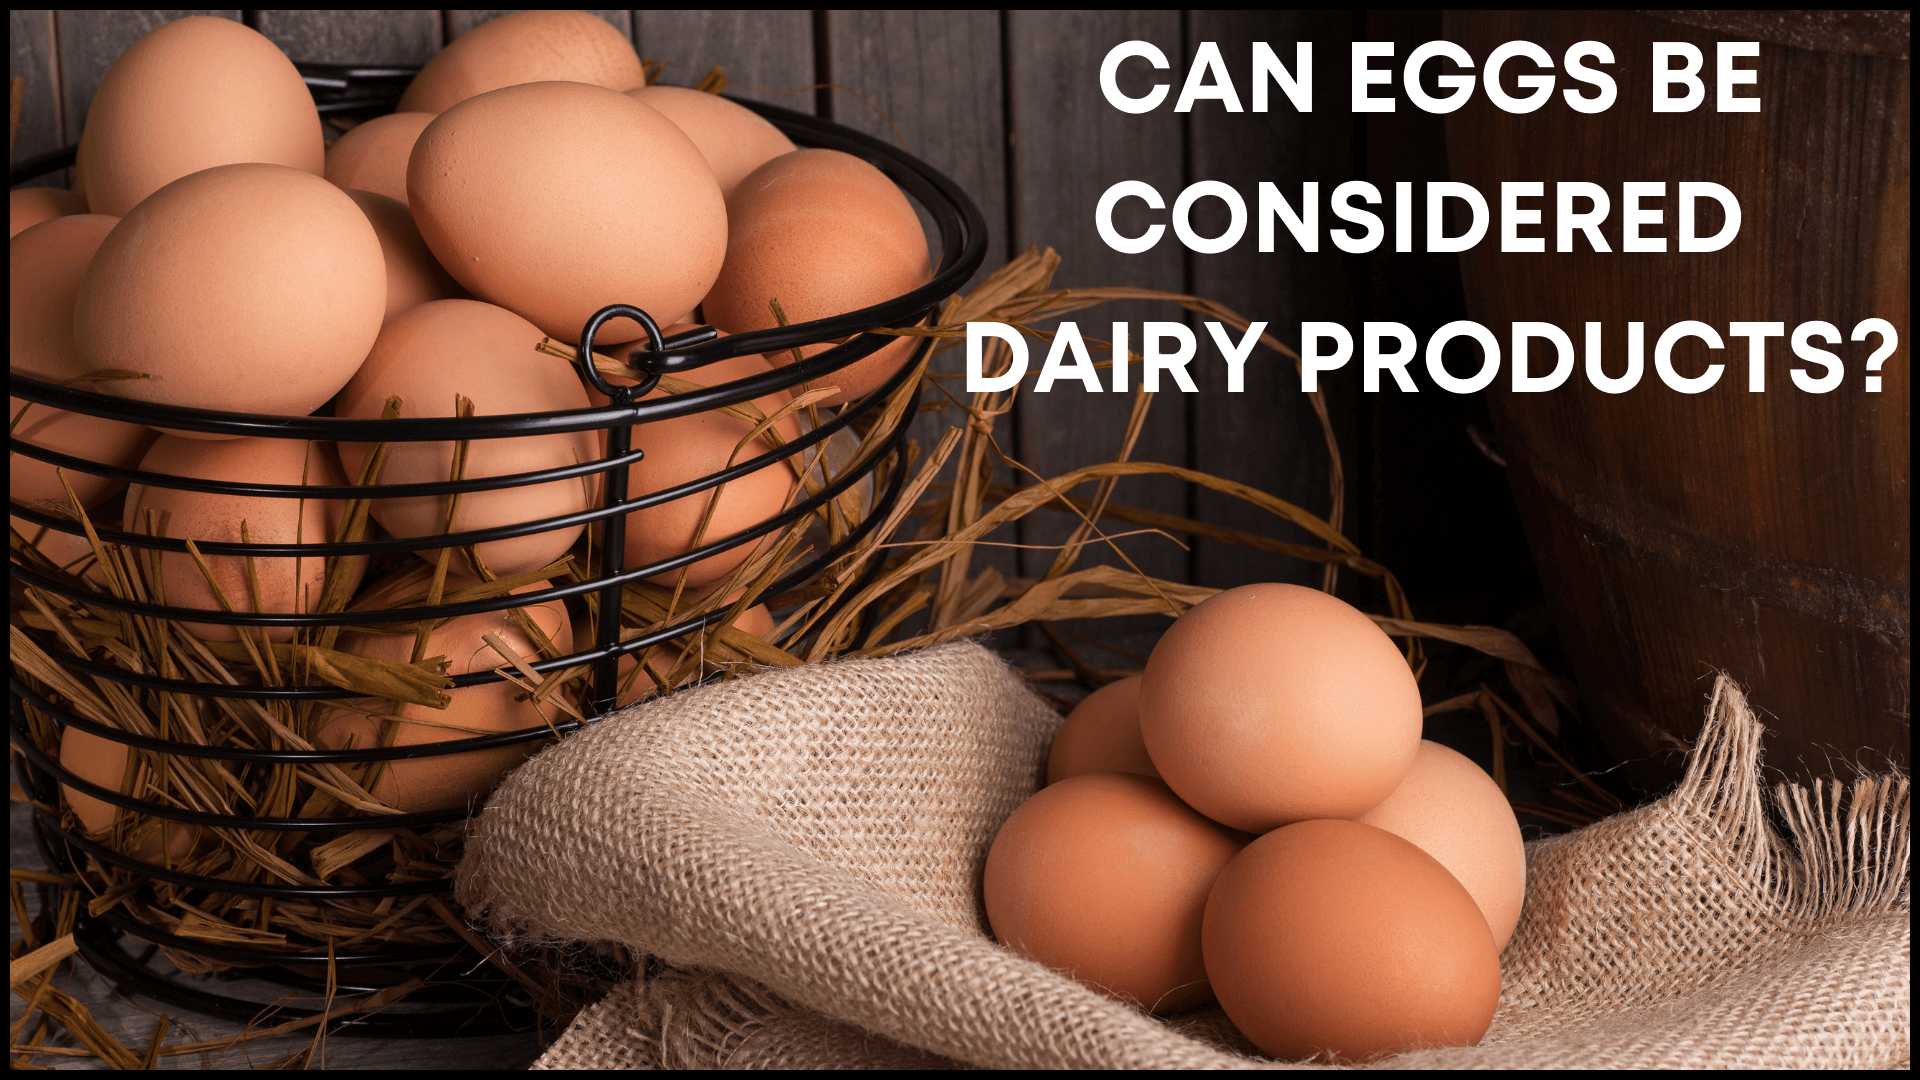 Can eggs be considered dairy products? - What is egg?